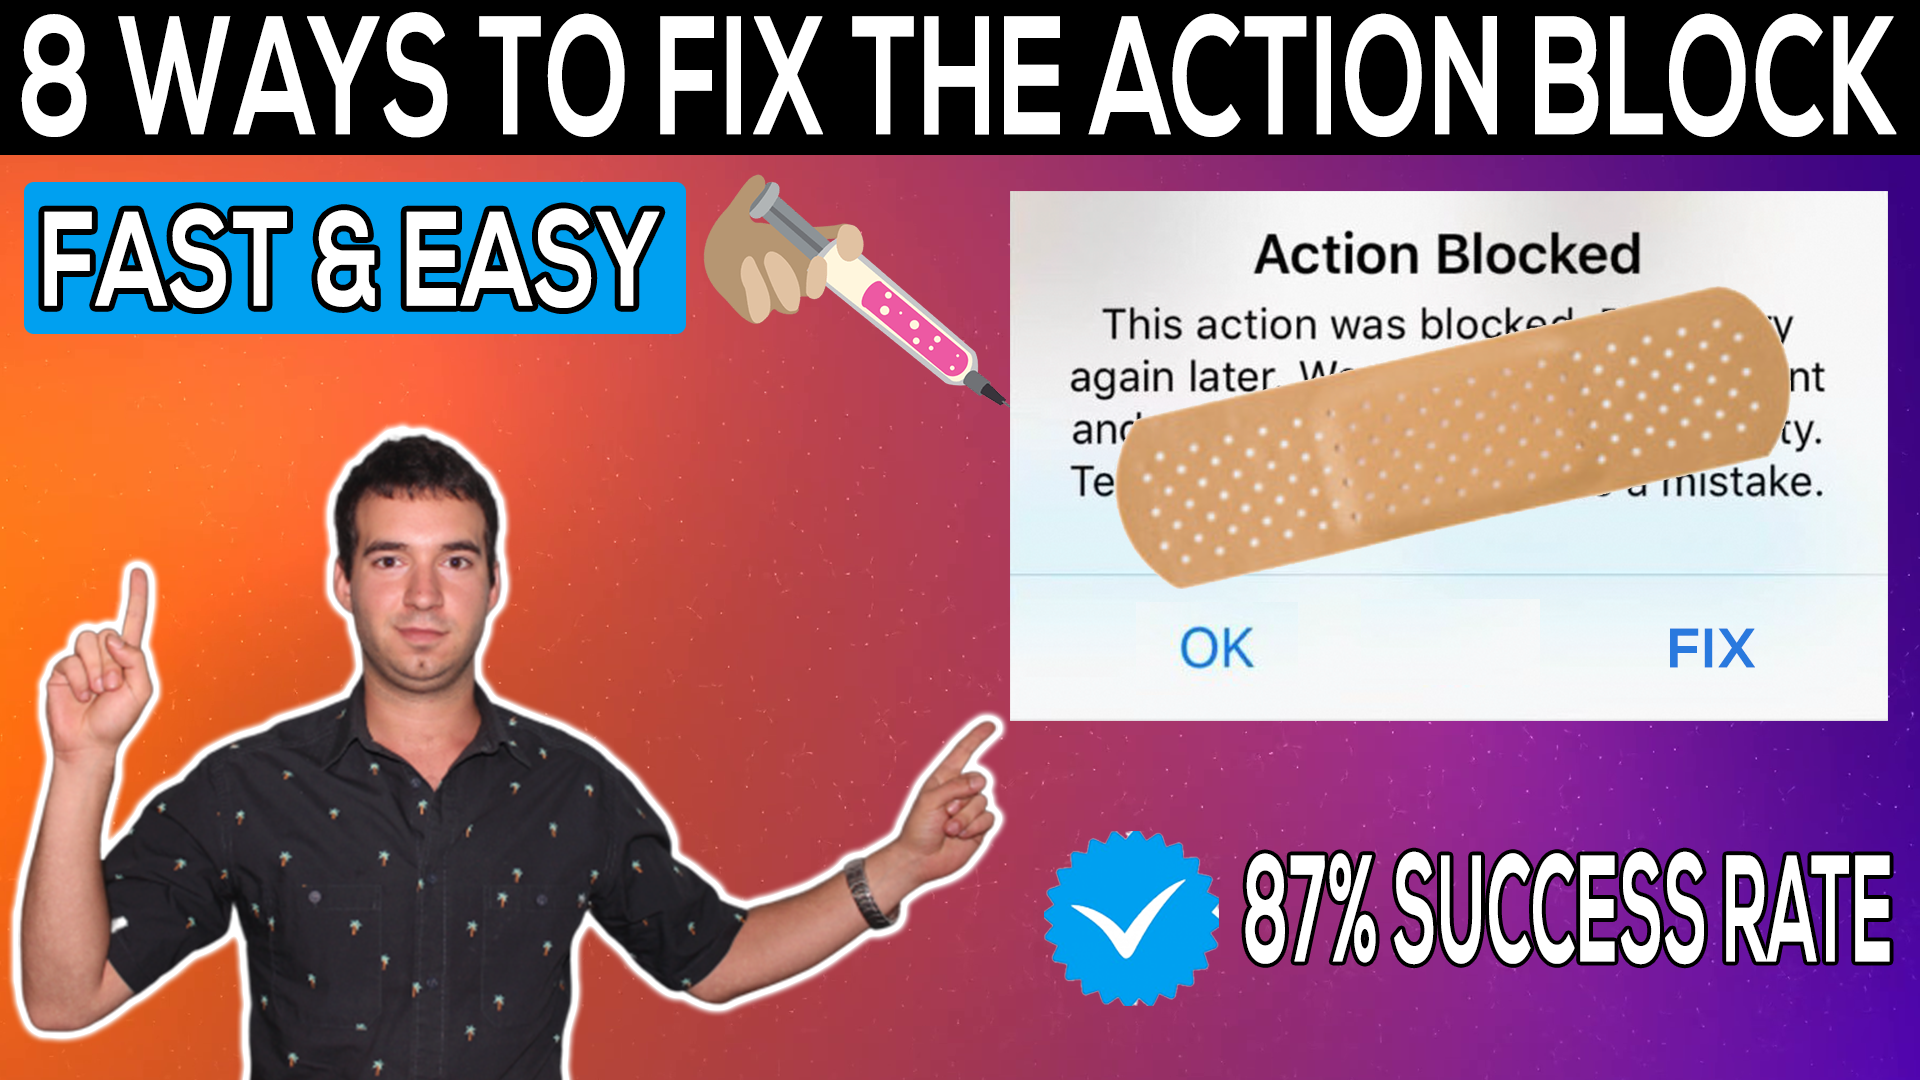 How To Remove Action Block On Instagram [Fast And Easy]